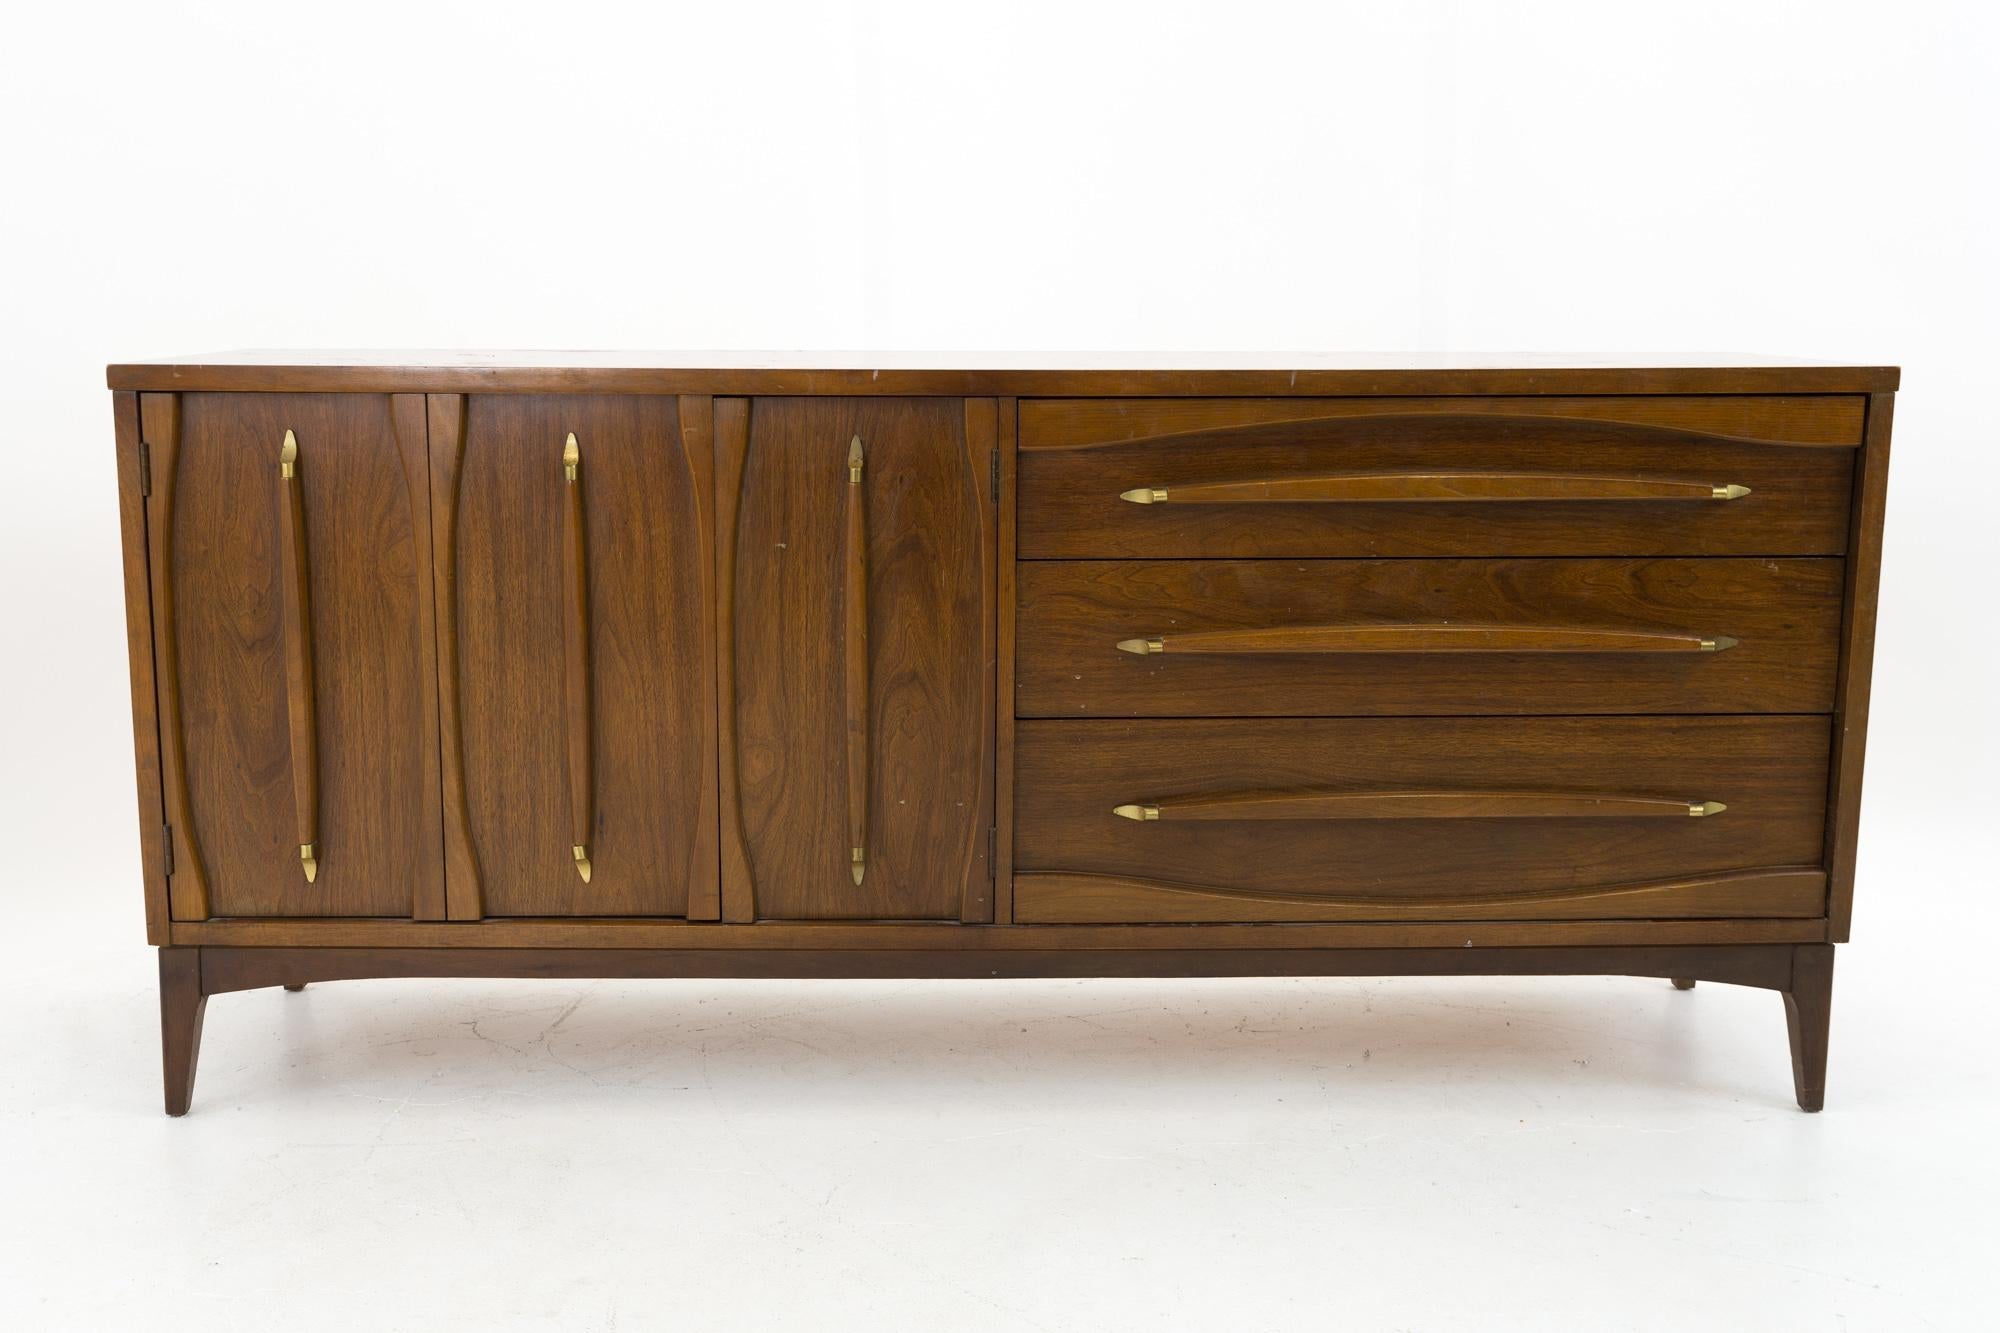 Kroehler Walnut and brass midcentury lowboy dresser with mirror

This dresser measures: 70 wide x 18 deep x 31 inches high

All pieces of furniture can be had in what we call restored vintage condition. That means the piece is restored upon